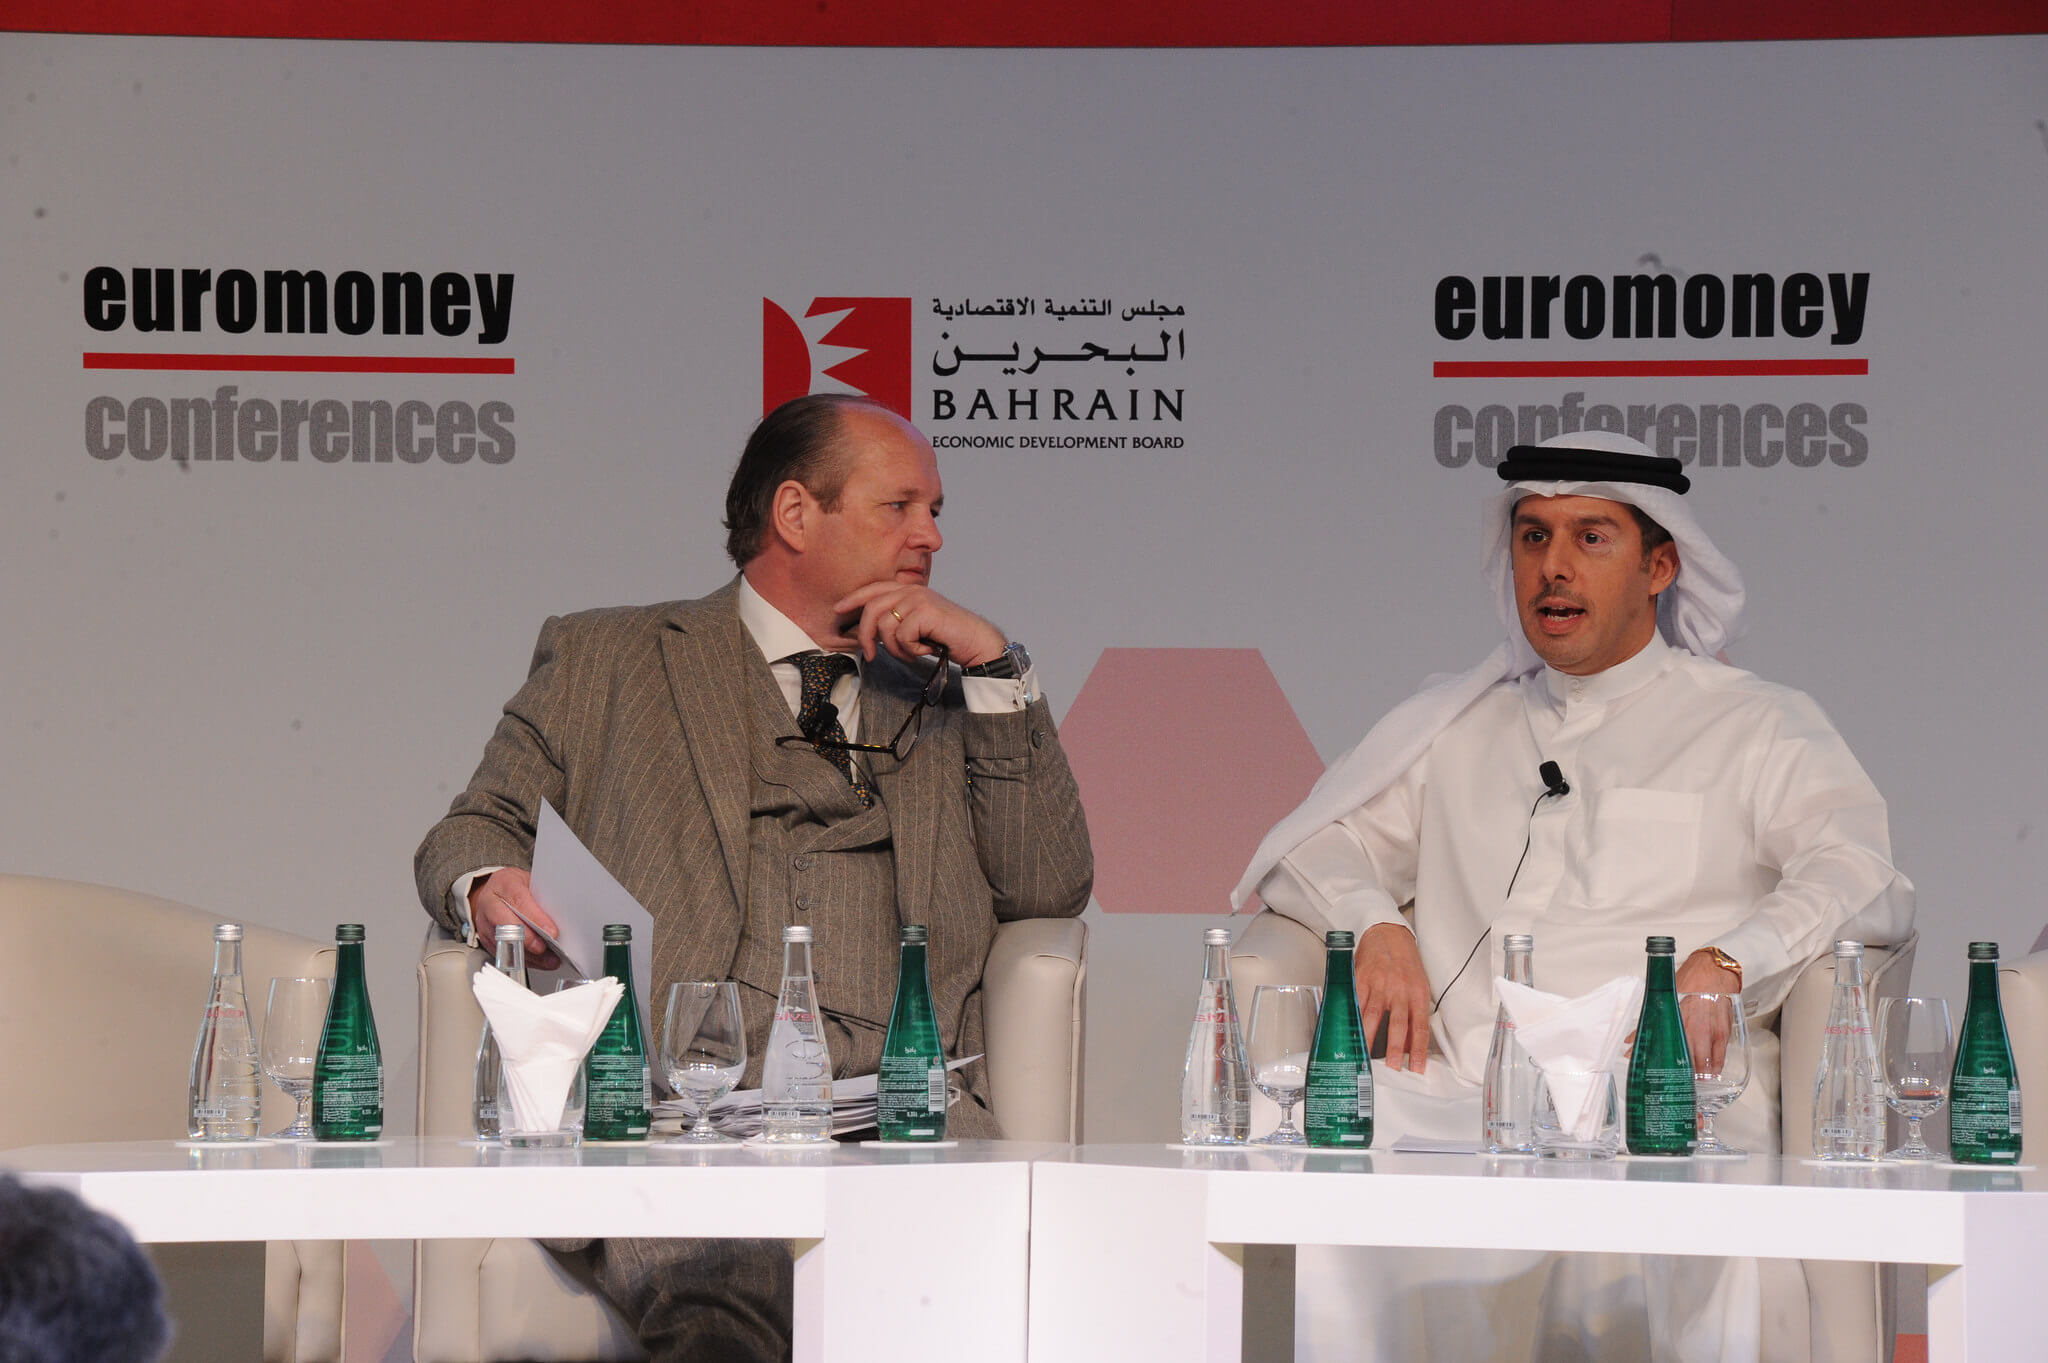 Innovation is key at the GCC Financial Forum